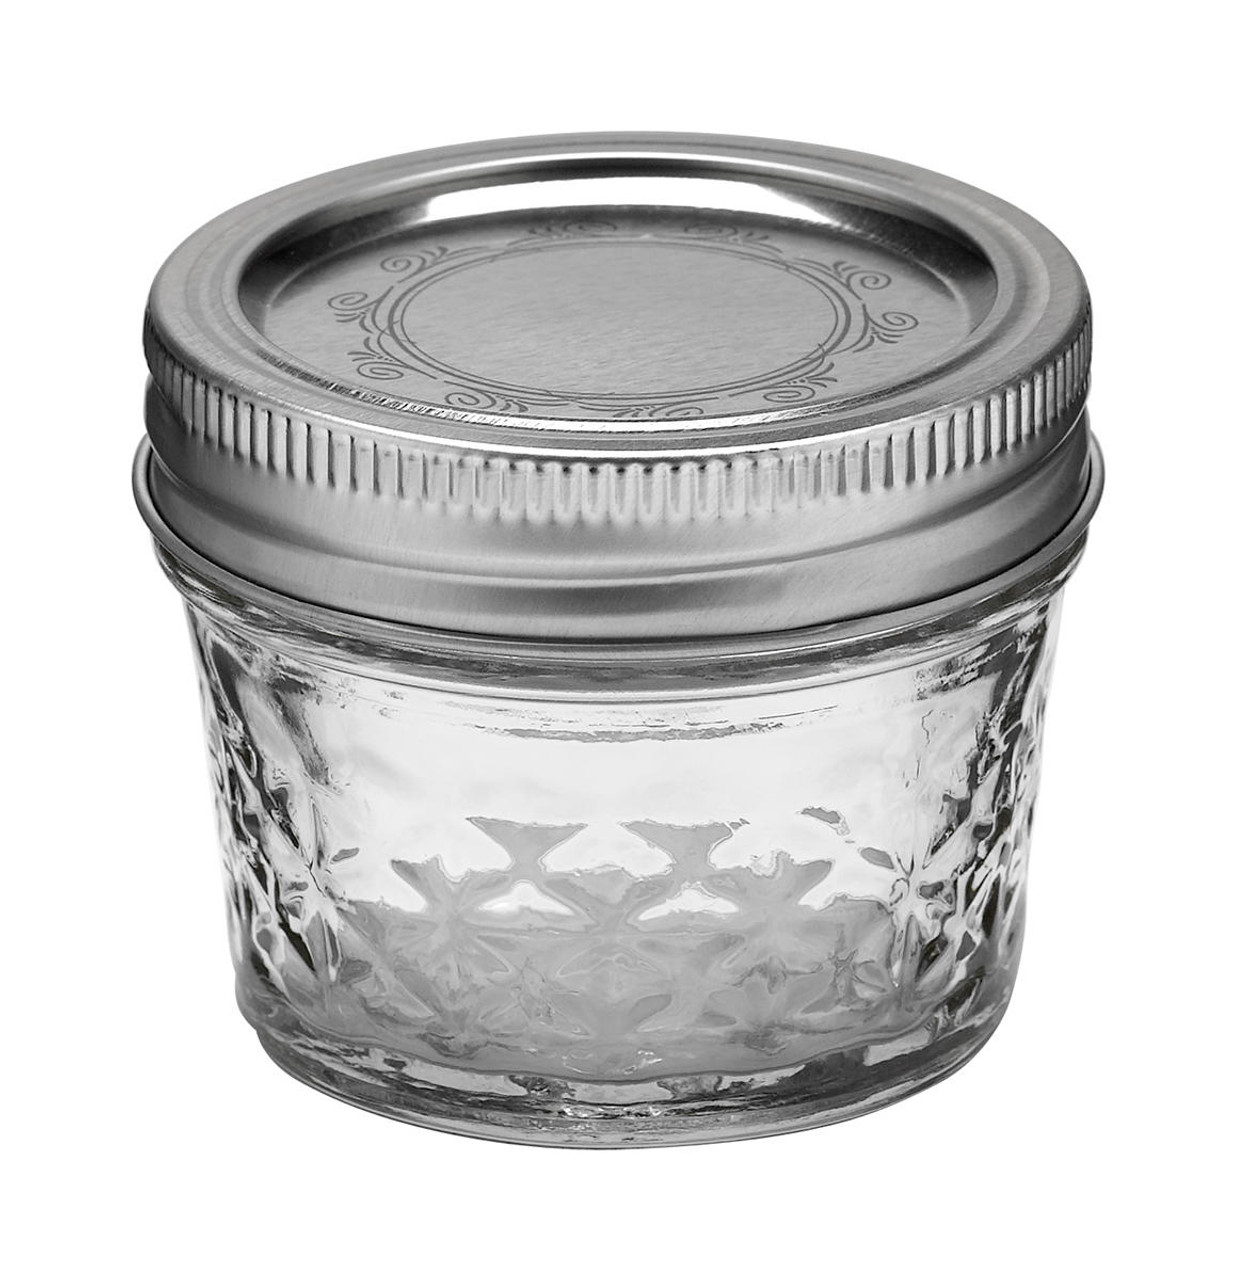 Ball 16 oz. Wide Mouth Pint Glass Jar (12-Pack/Case) 14400-66000